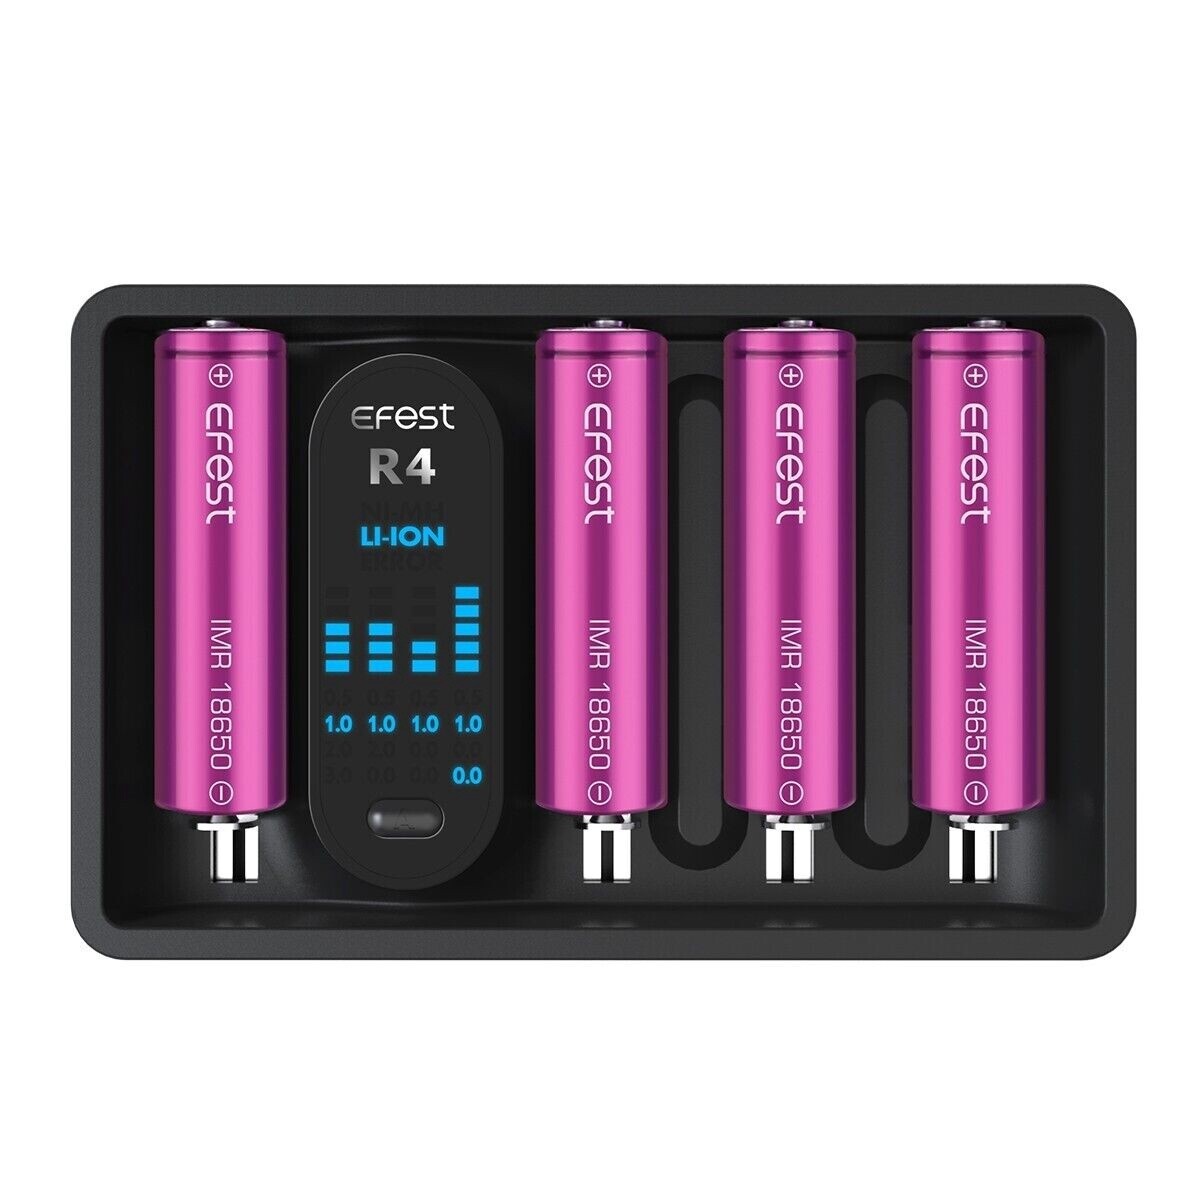 Efest Battery Charger iMate R4